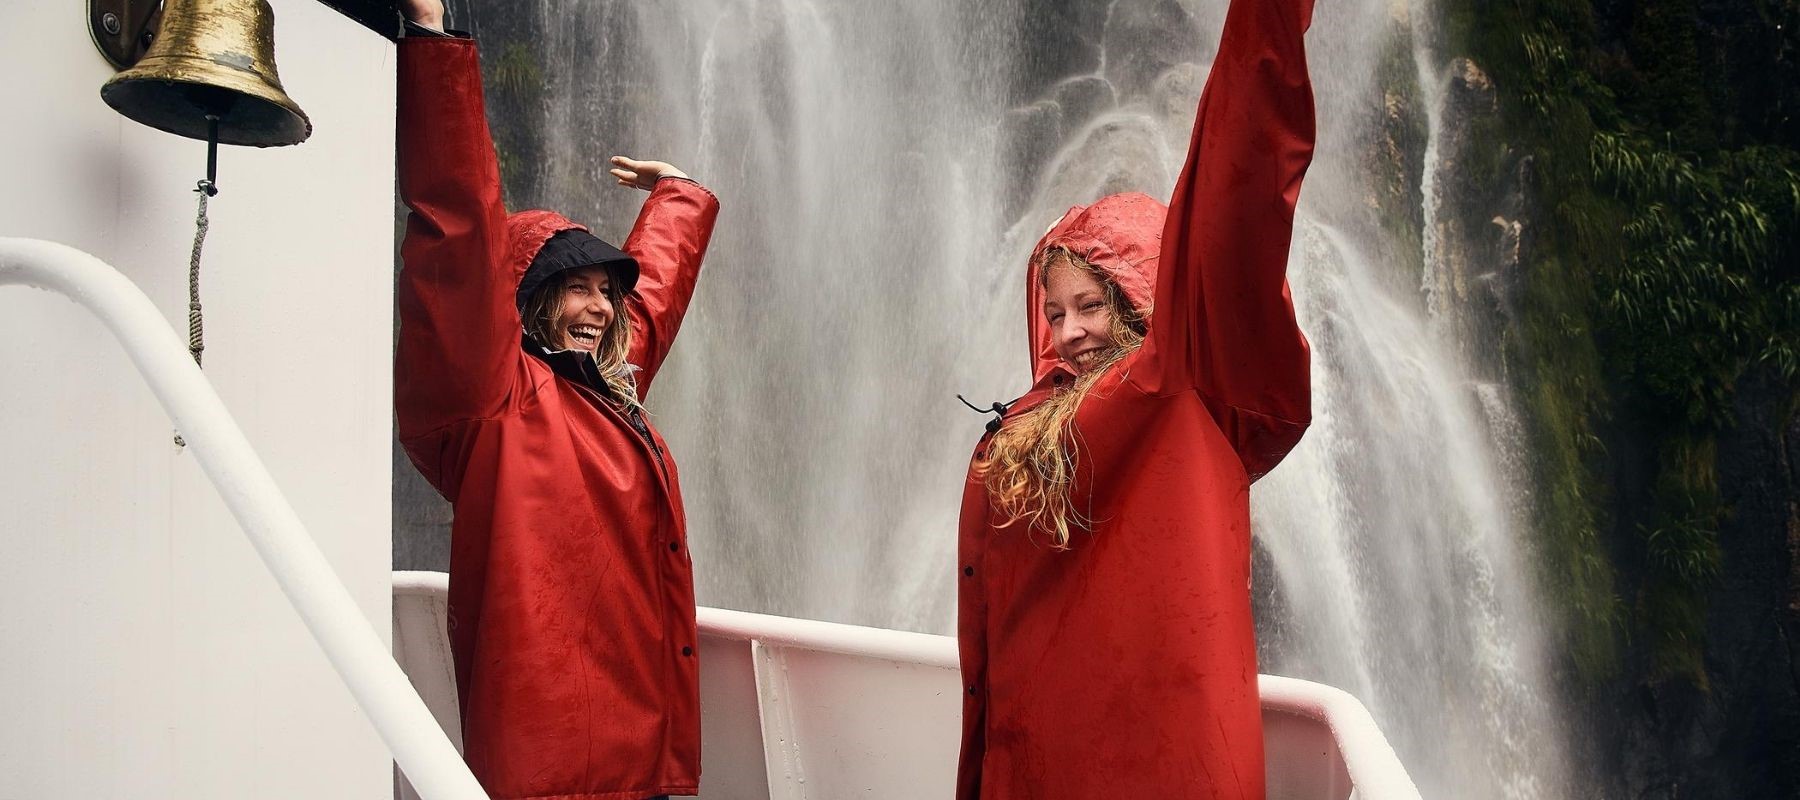 Two women enjoy waterfall spray from a Southern Discoveries boat tour from Milford Sound Lodge.